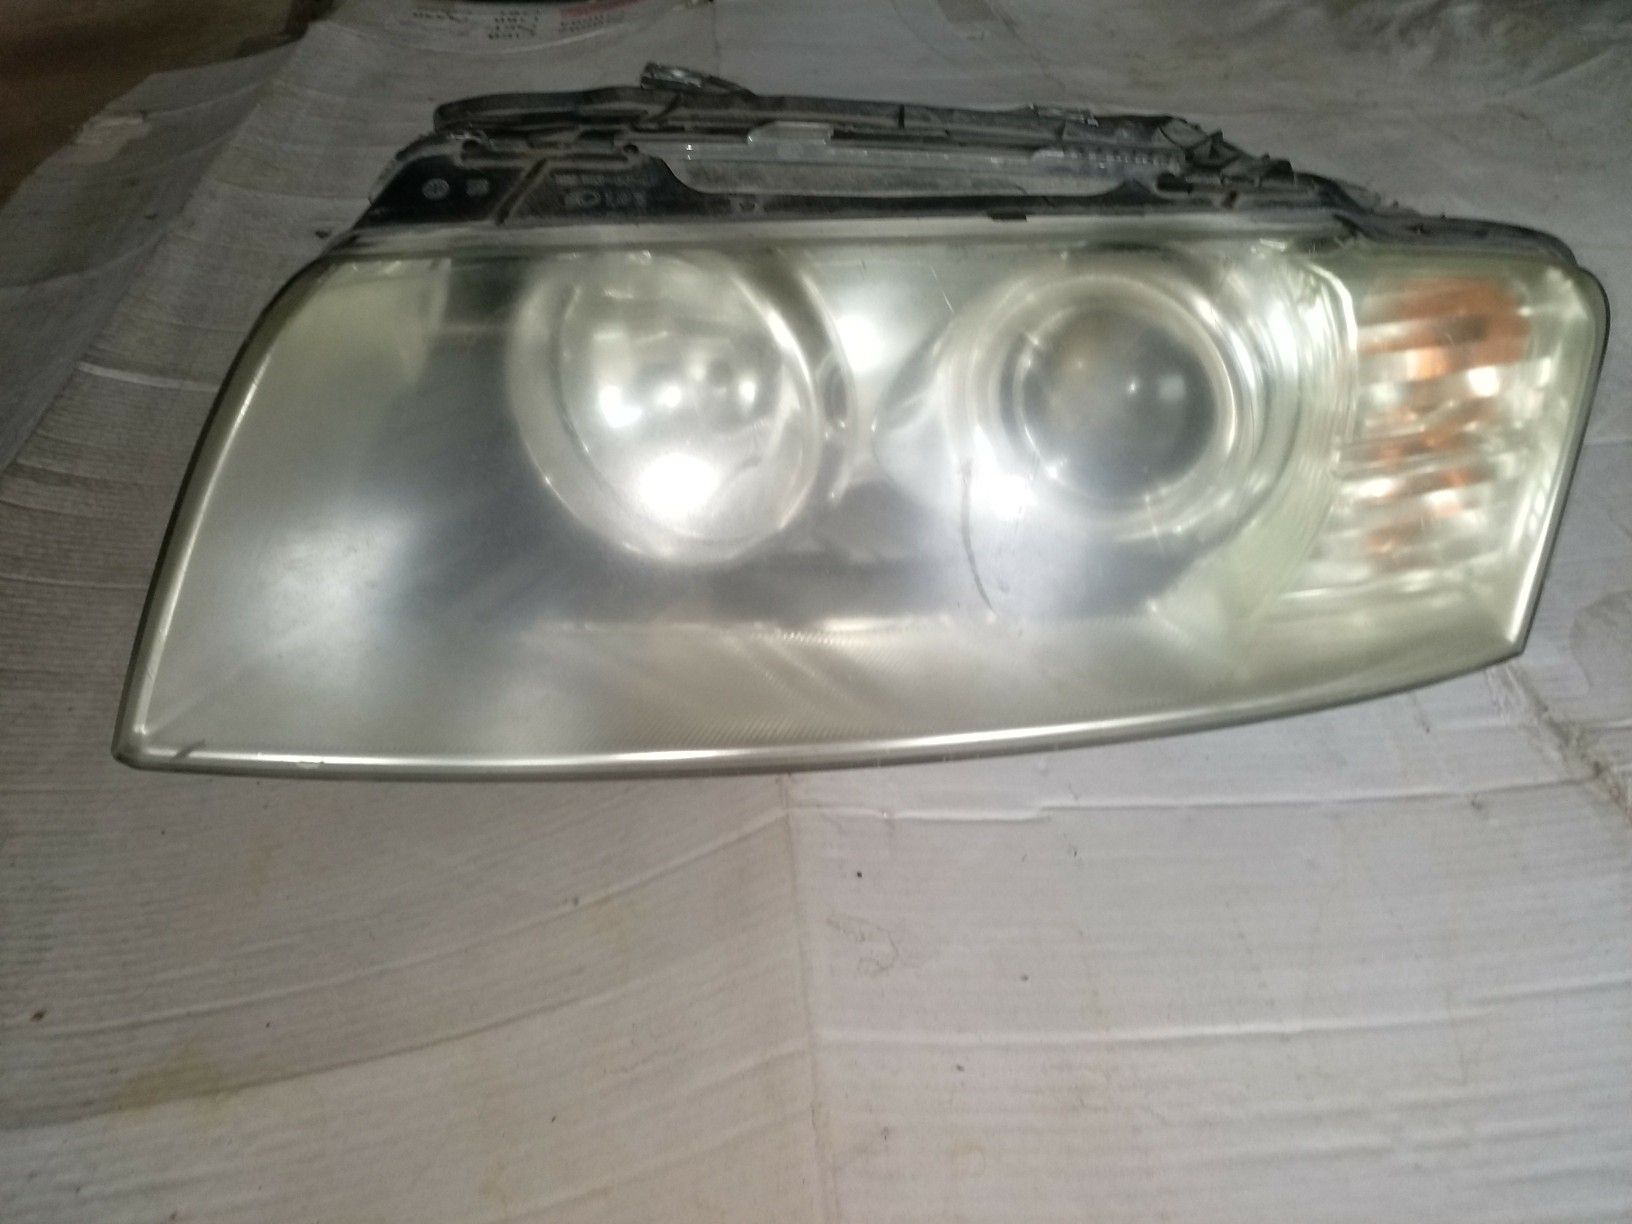 2003,2004,2005,2006 Audi a8 left driver front side headlight headlamp front light with all brackets computers and balasts OEM part